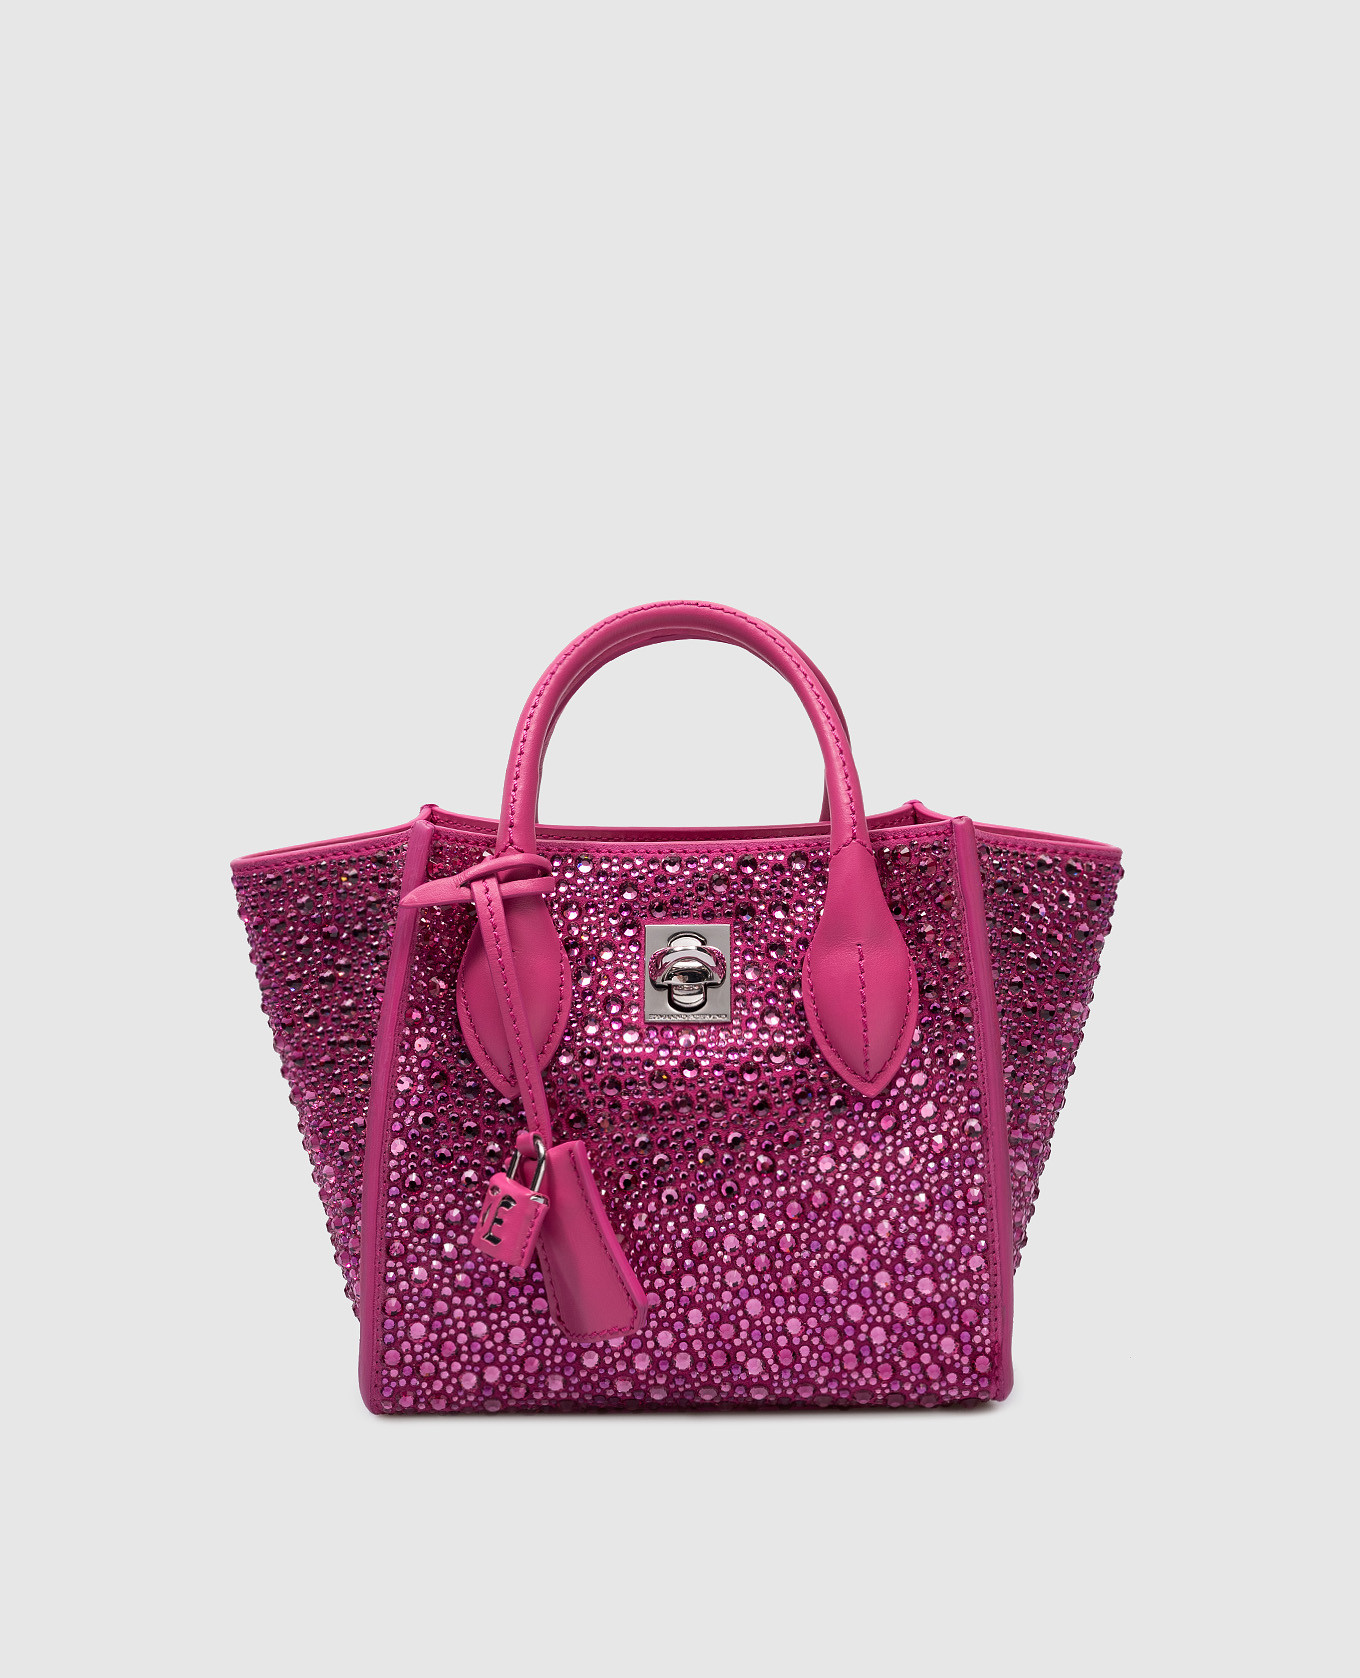 Maggie pink suede bag with crystals